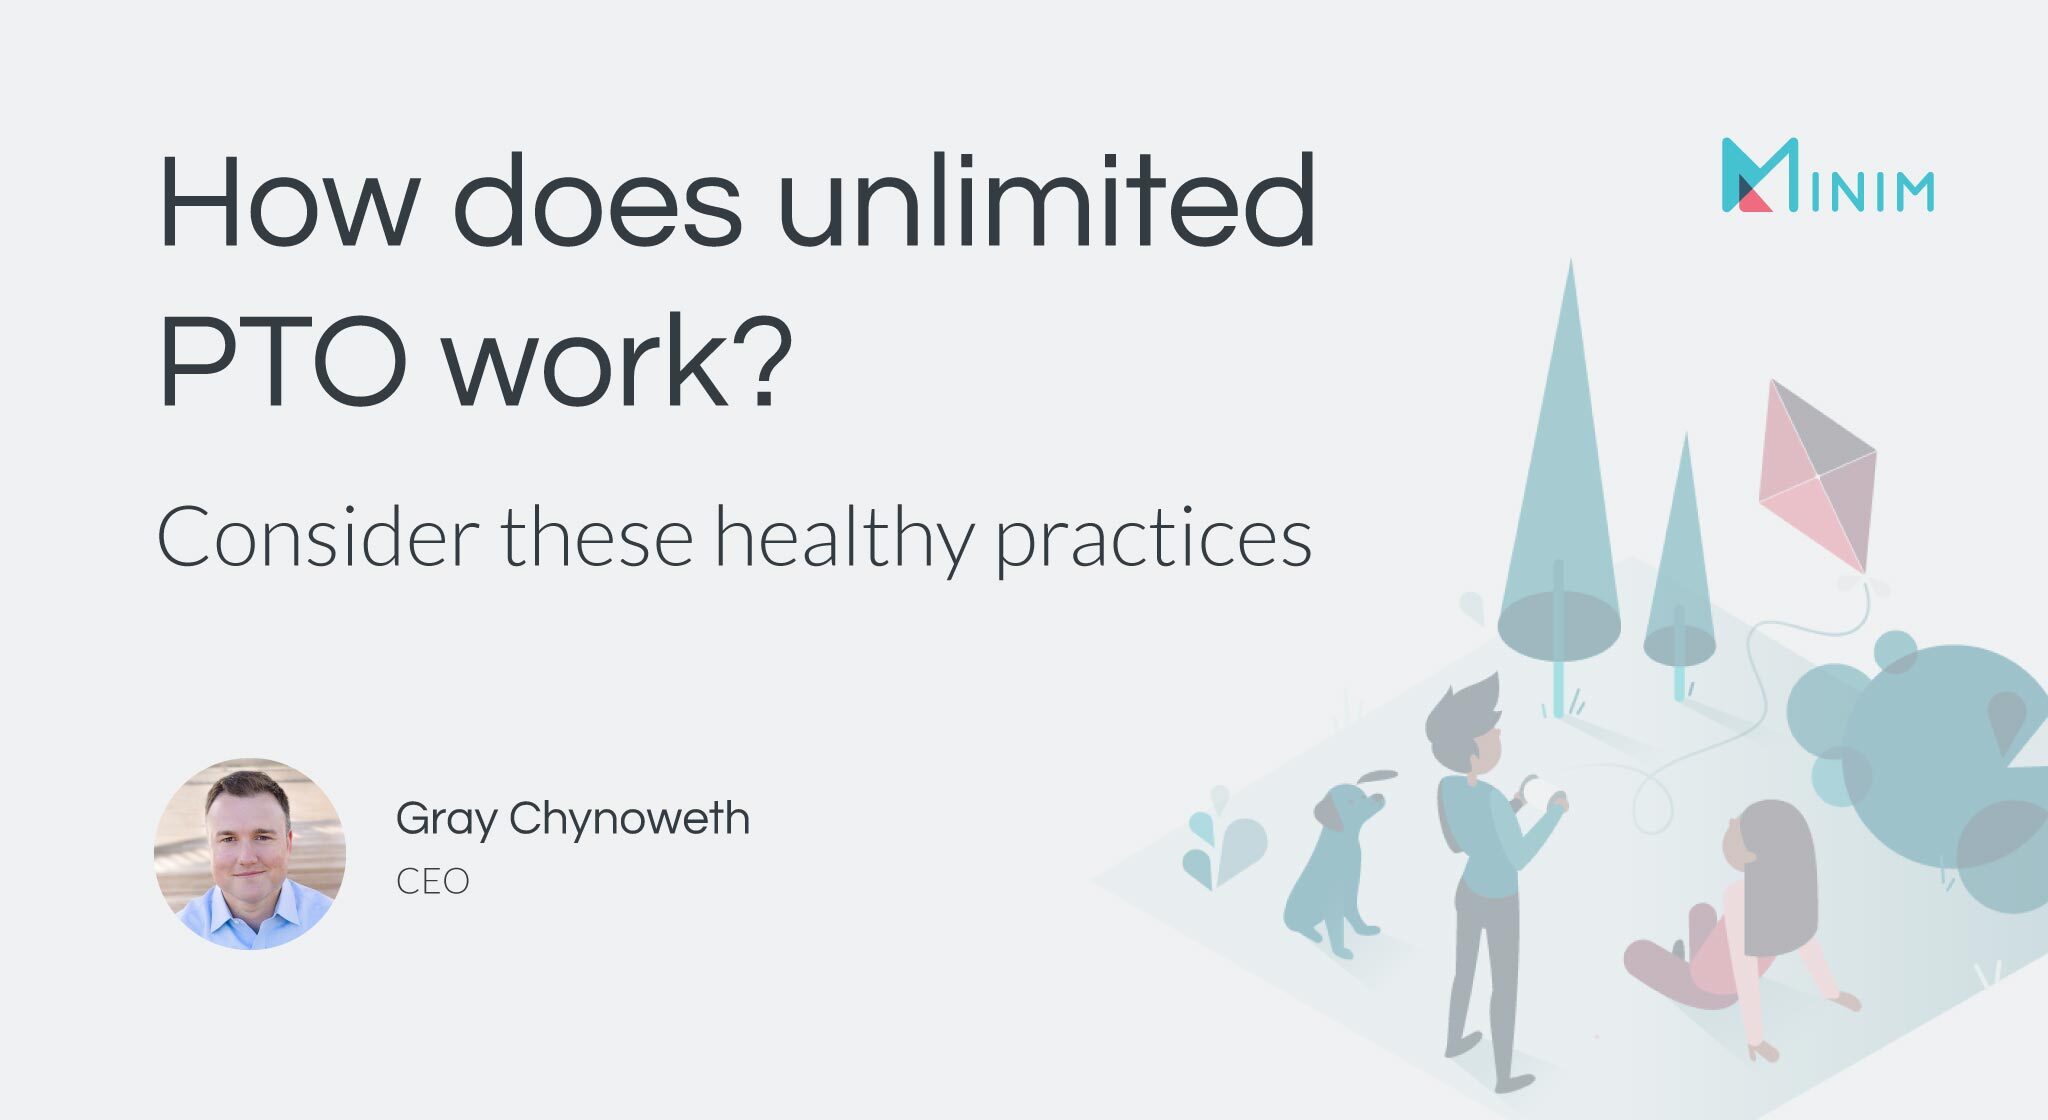 How does unlimited PTO work?